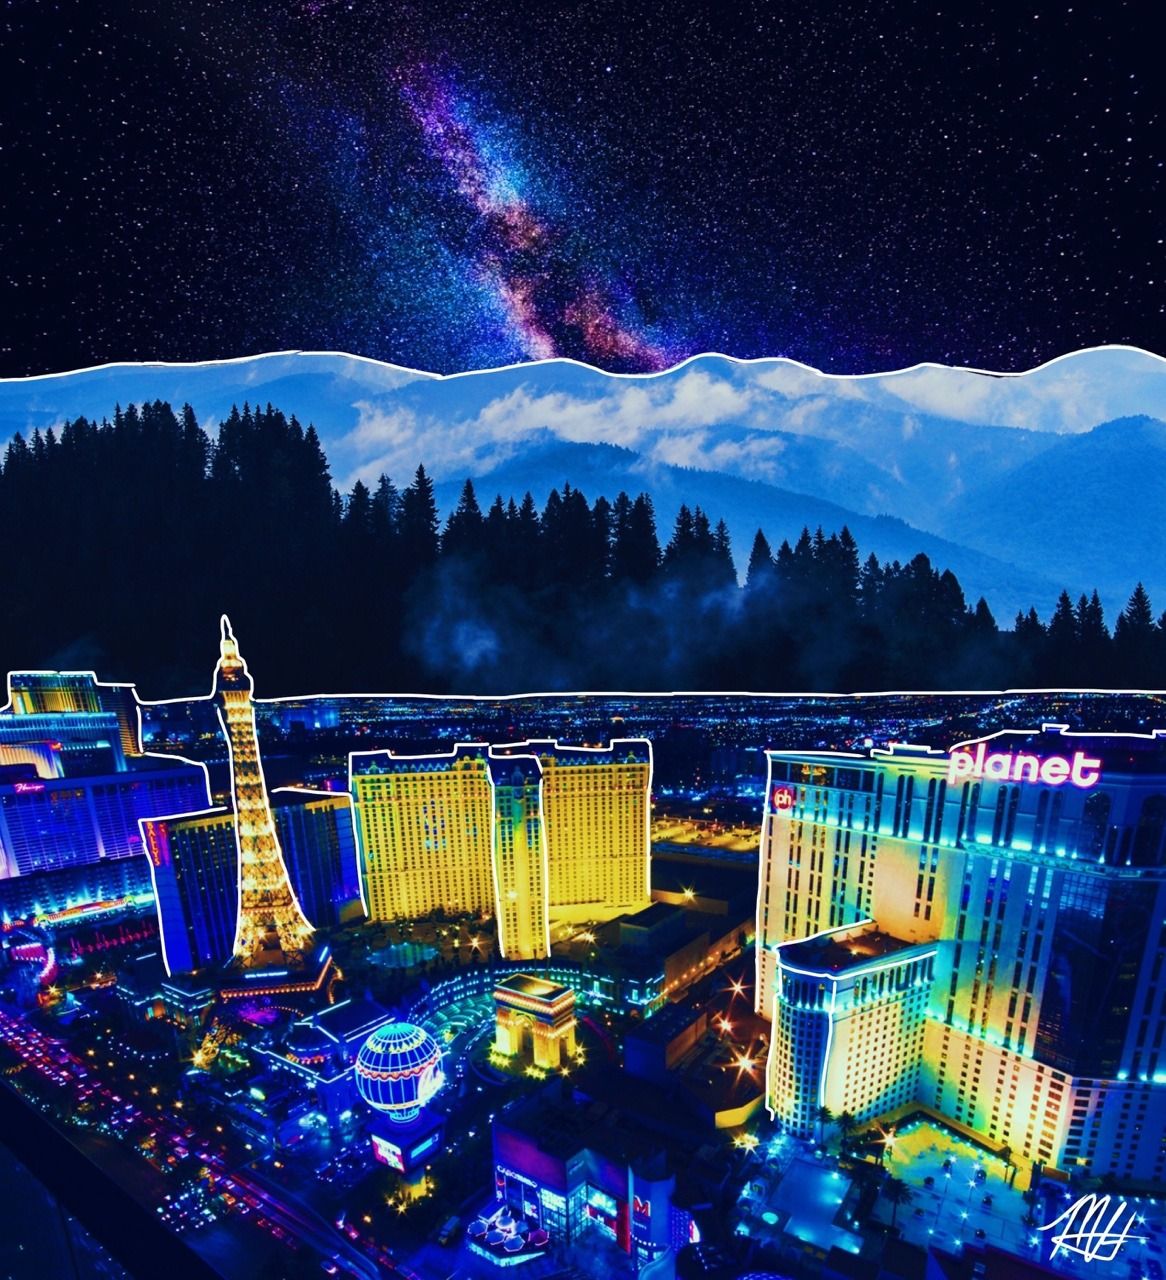 A city at night with bright lights and mountains in the background - Las Vegas